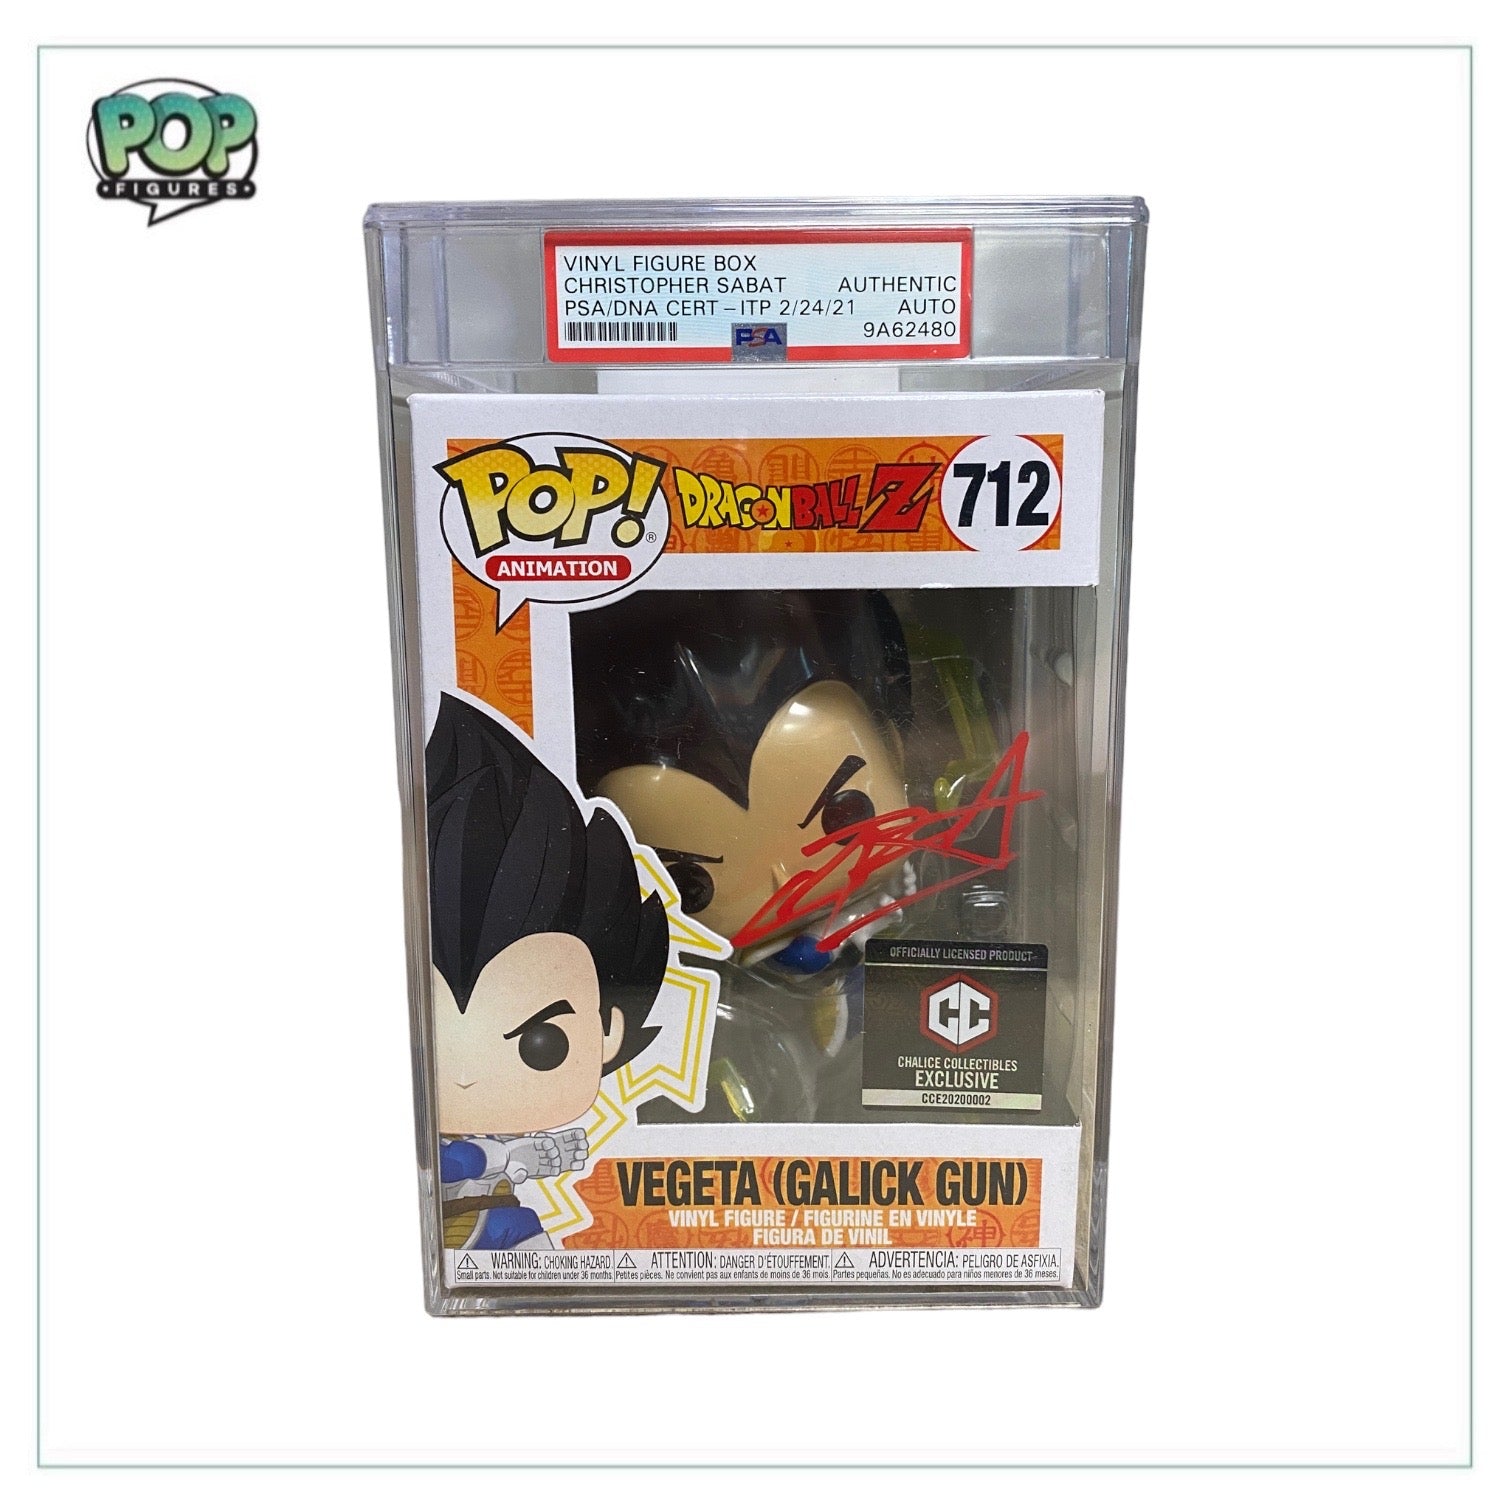 Christopher Sabat Signed Vegeta (Galick Gun) #712 Funko Pop! - Dragon Ball Z - Chalice Collectibles Exclusive - PSA In-the-Presence Authentication